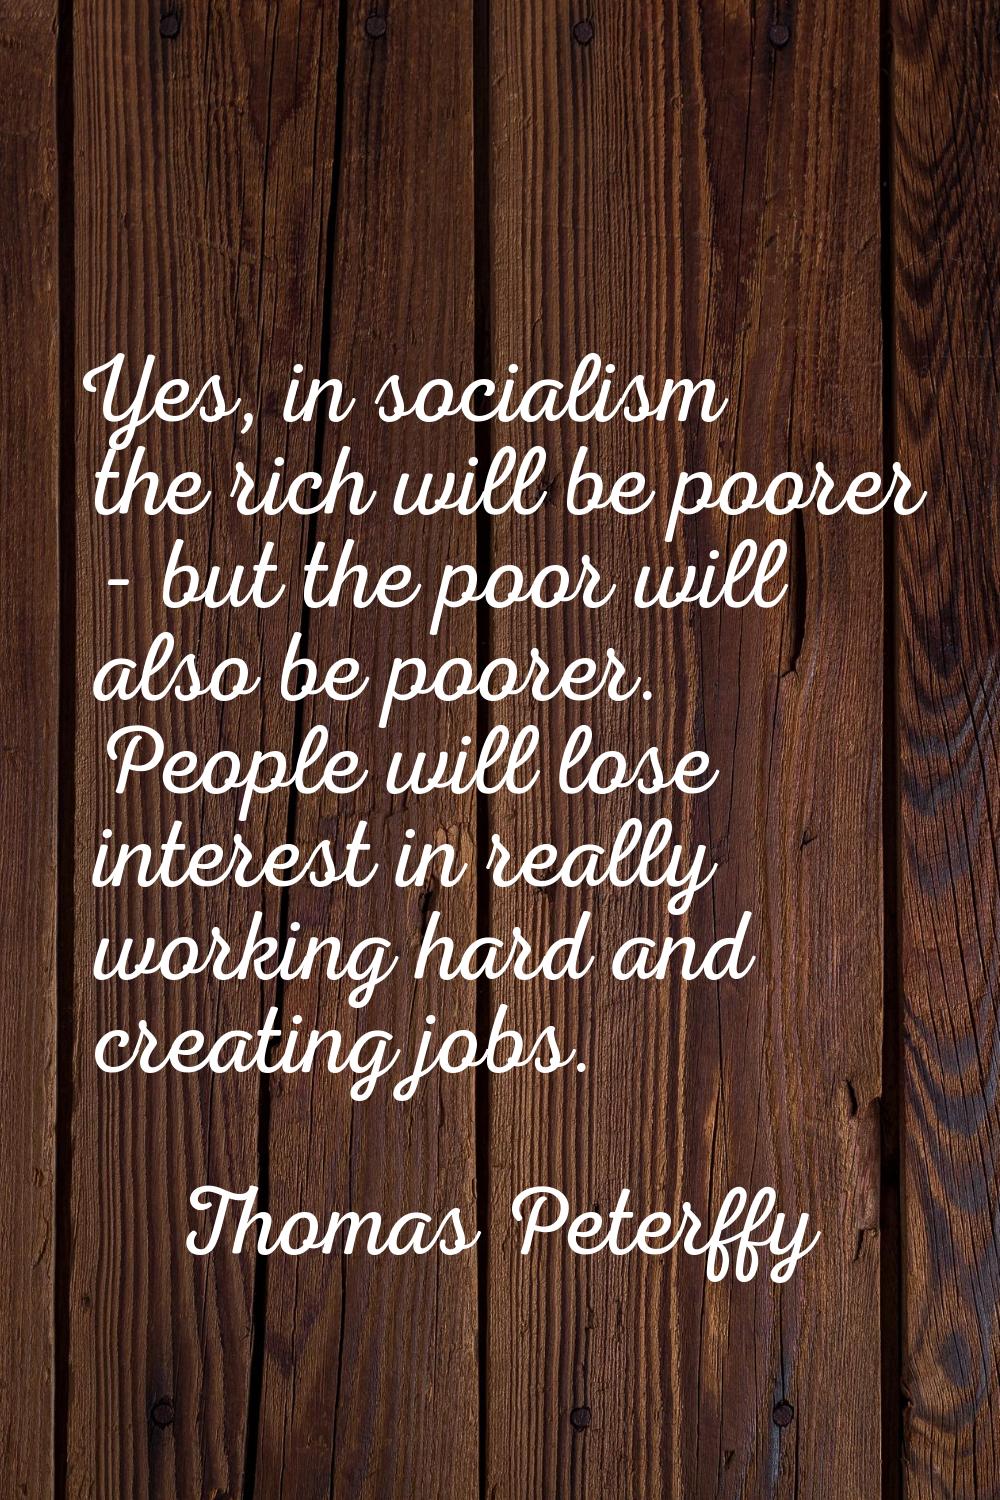 Yes, in socialism the rich will be poorer - but the poor will also be poorer. People will lose inte